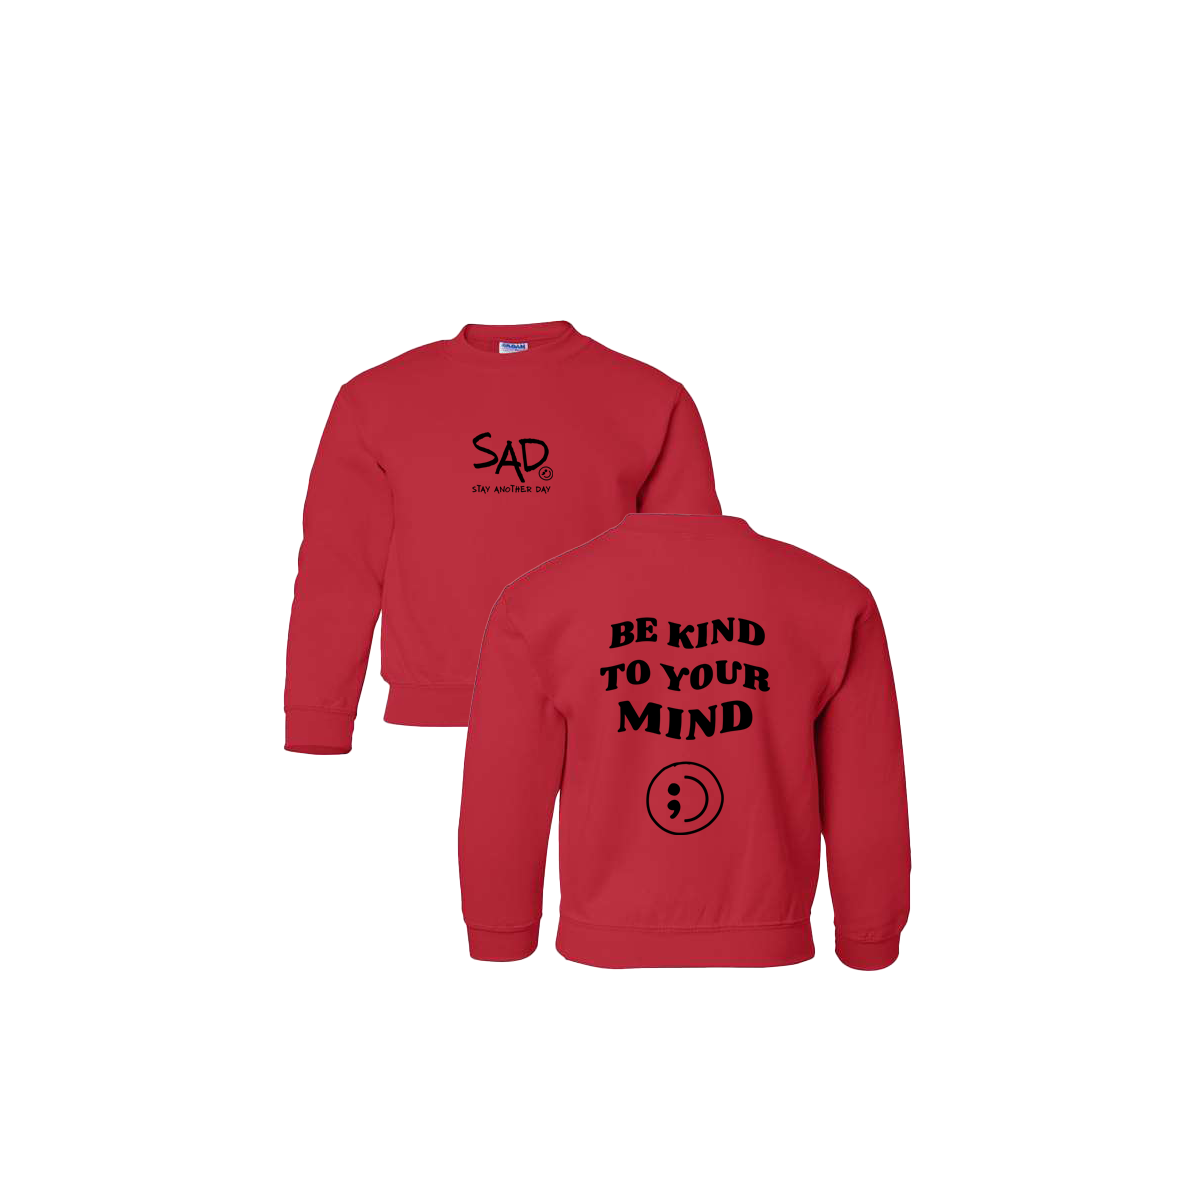 Be Kind To Your Mind Screen Printed Red Youth Crewneck